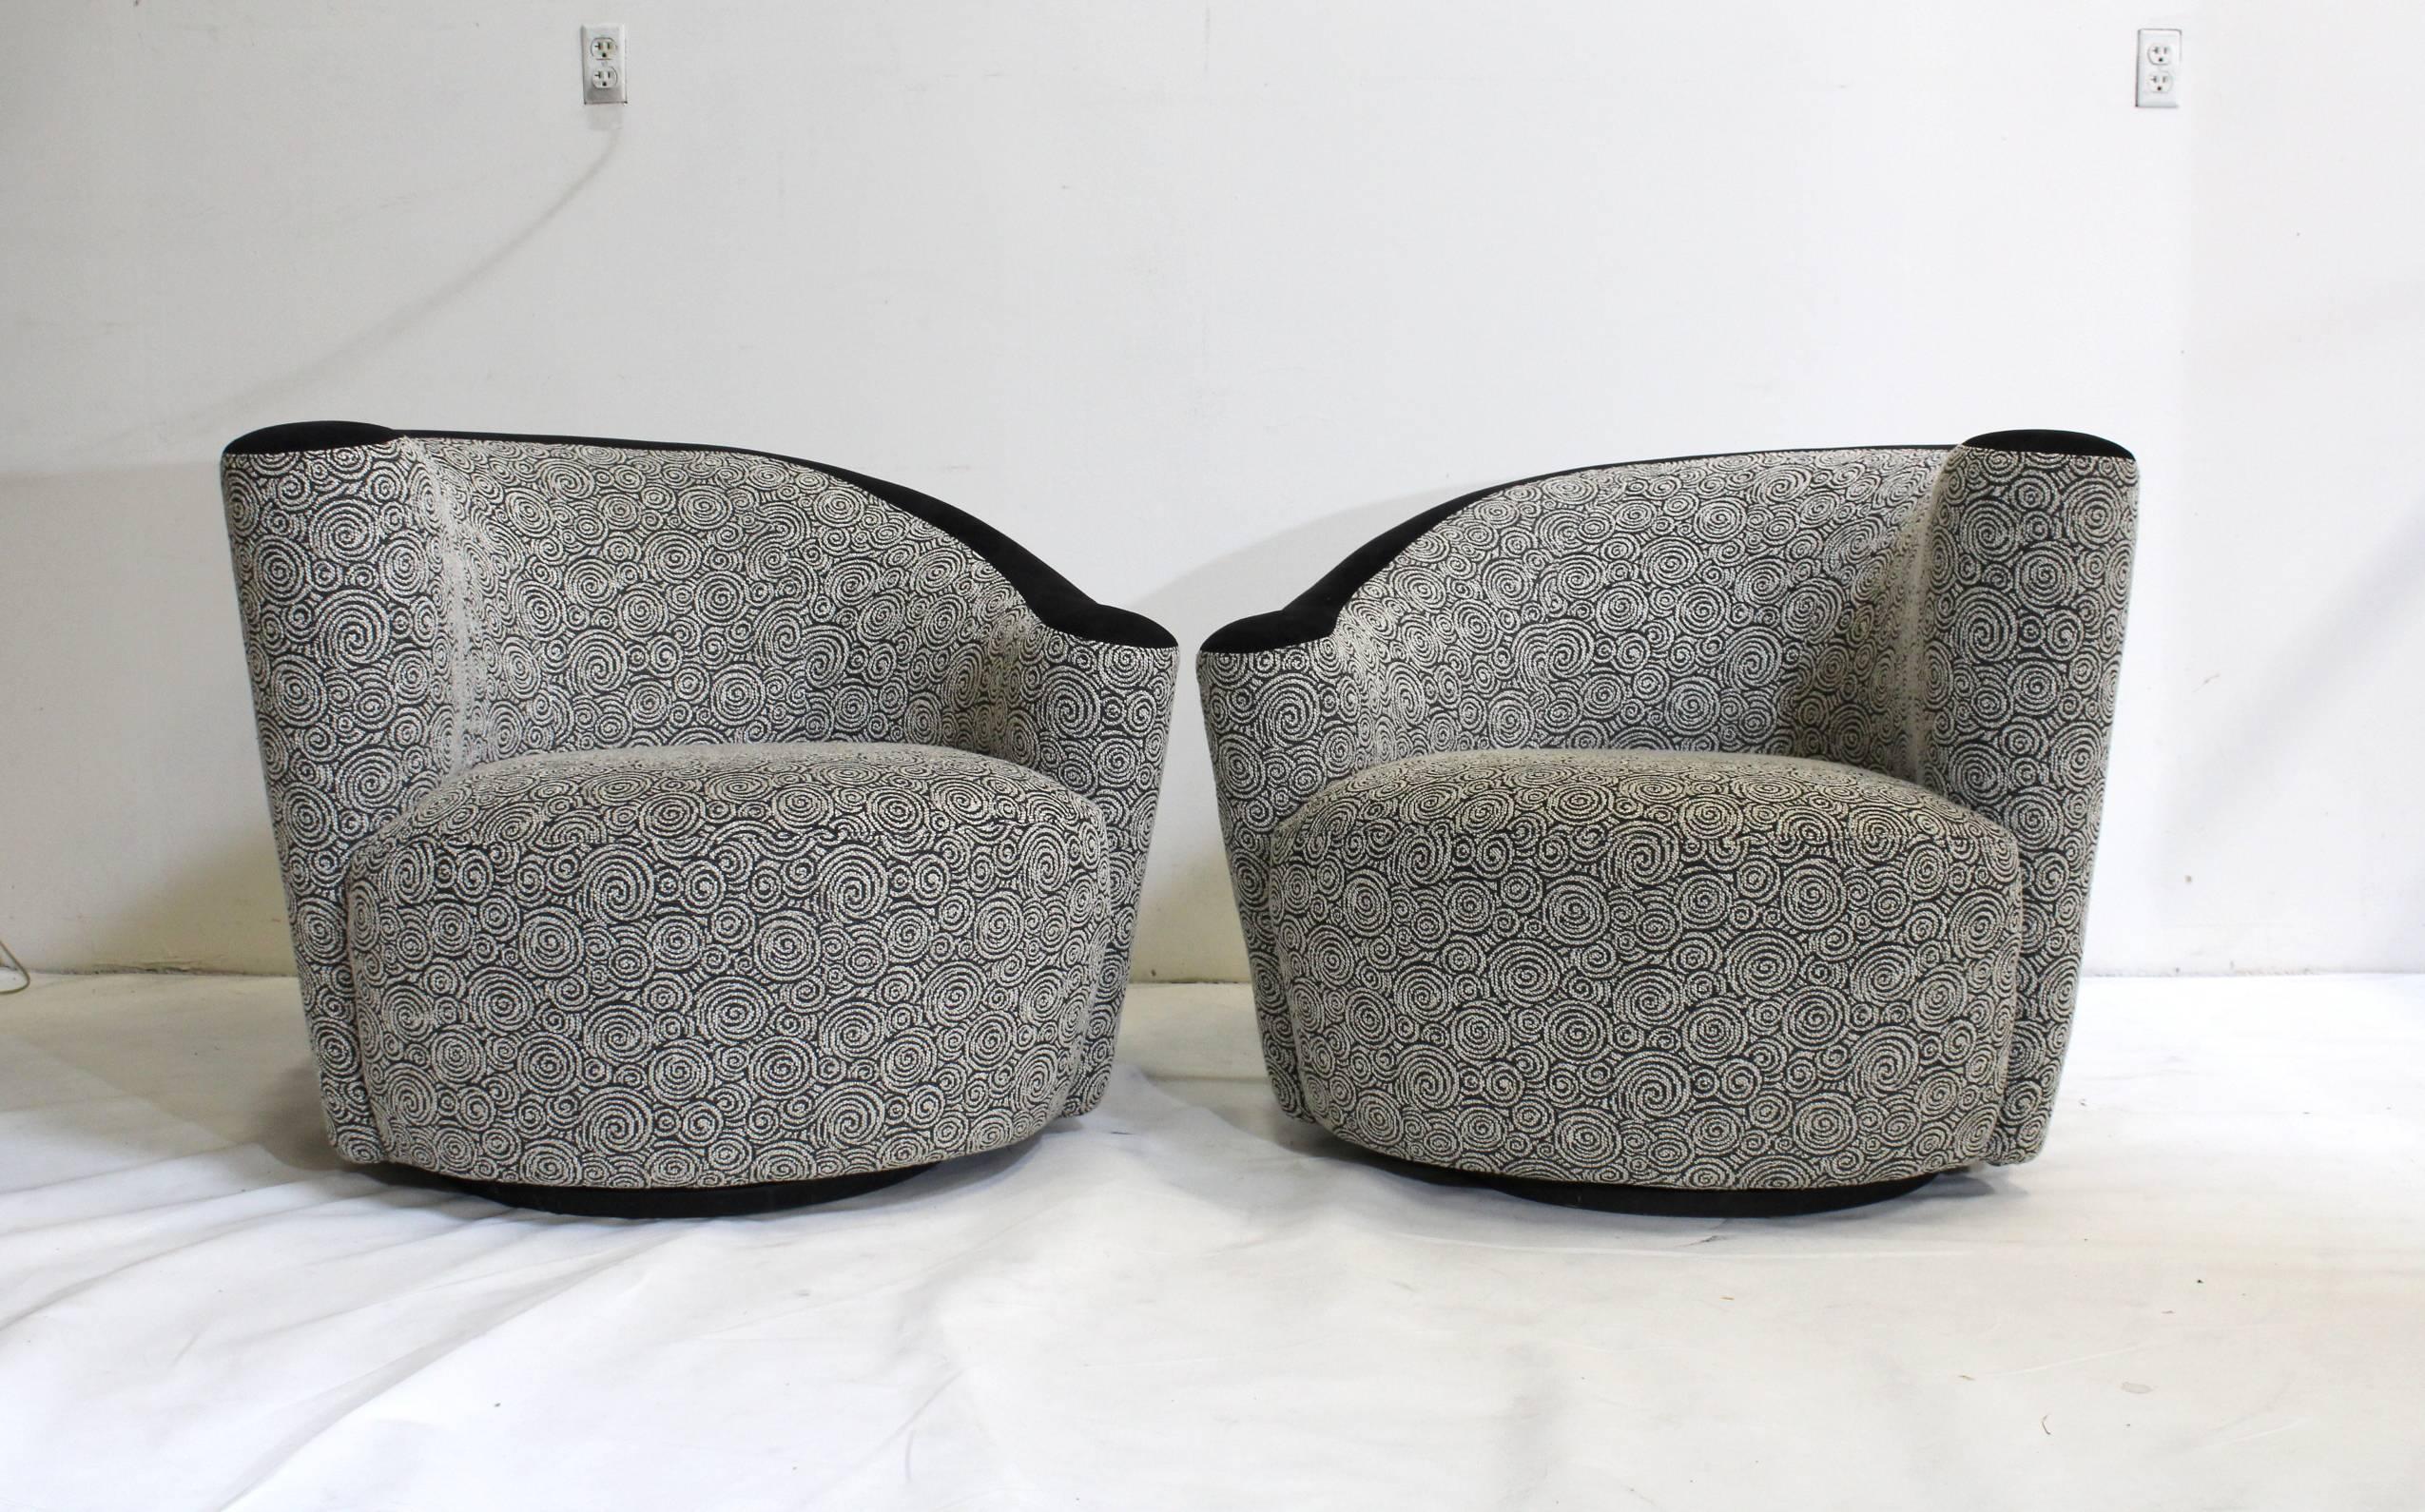 Opposing pair of Kagan's iconic Nautilus swivel chairs, upholstered in amazing wool-like grey spiral pattern with black ultrasuede accent. Fabric is in great condition!

We also have a matching opposing pair of Vladimir Kagan serpentine sofa's in